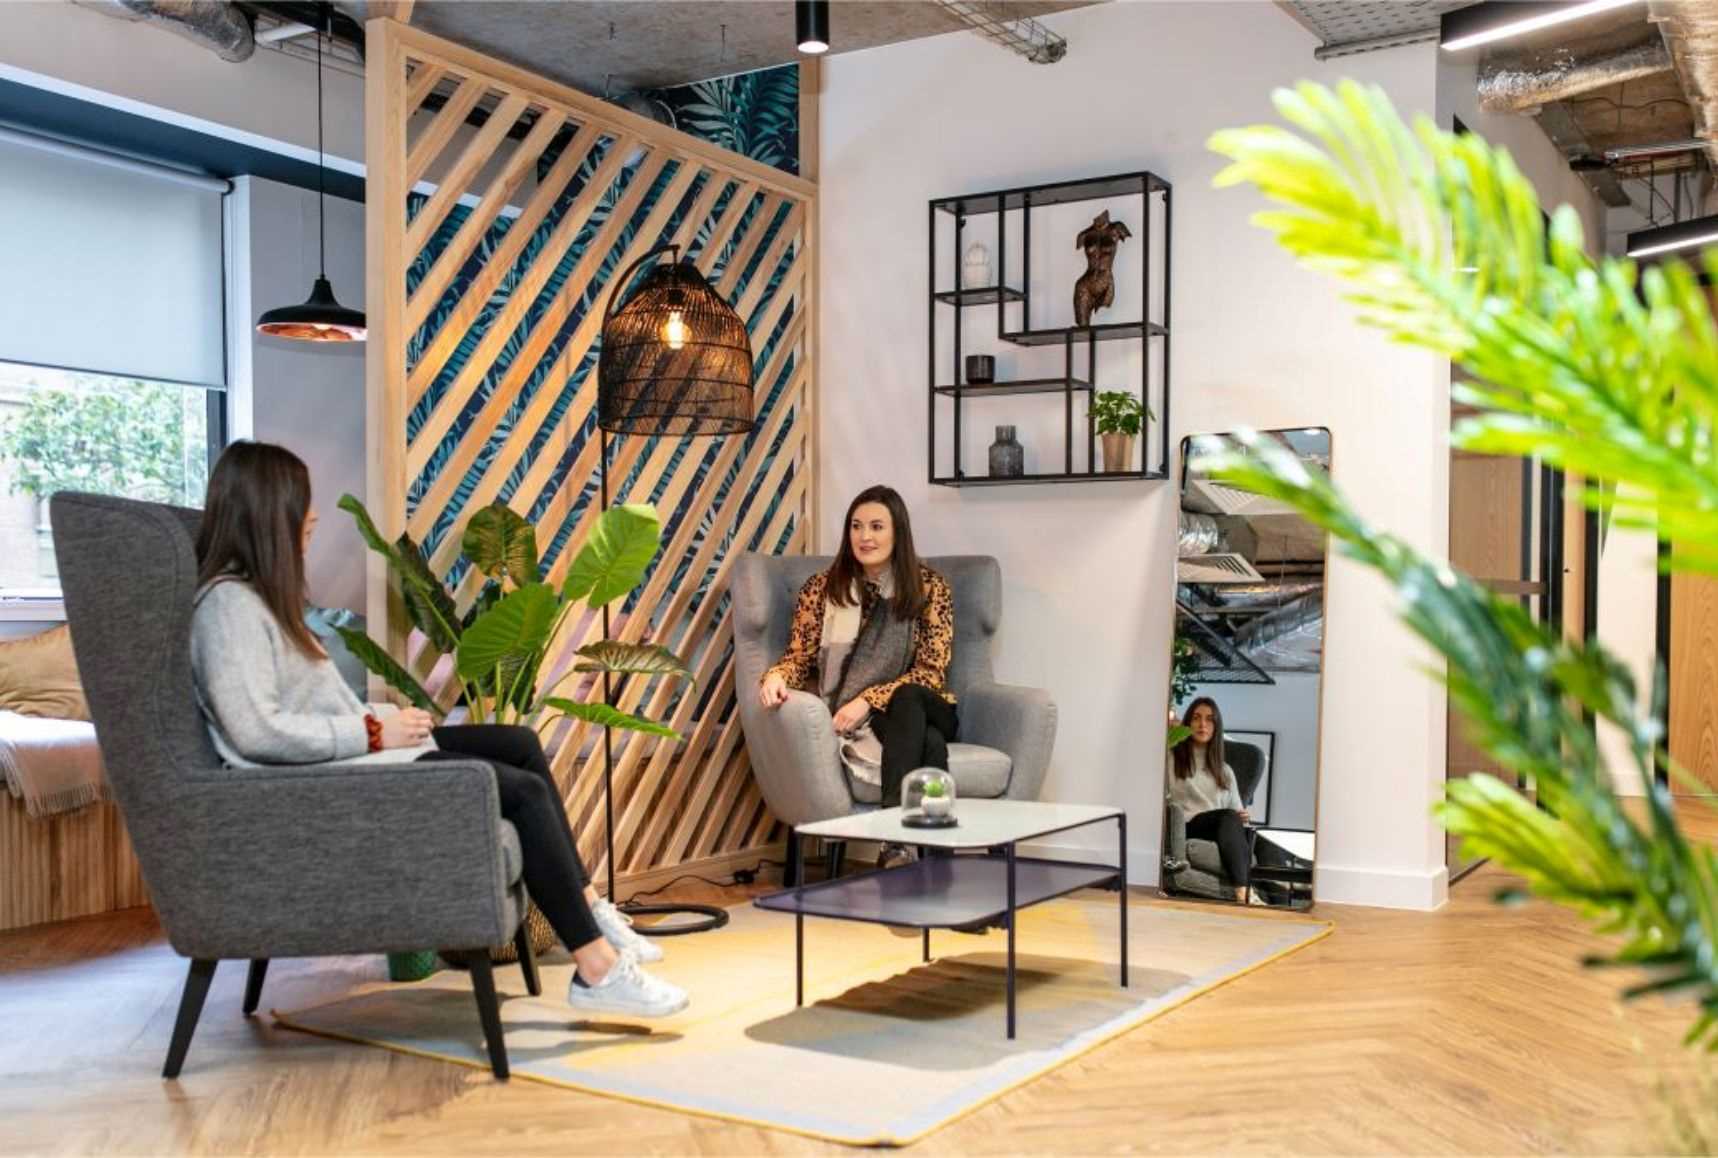 B Corp™ Runway East is home to stunning wellbeing spaces.